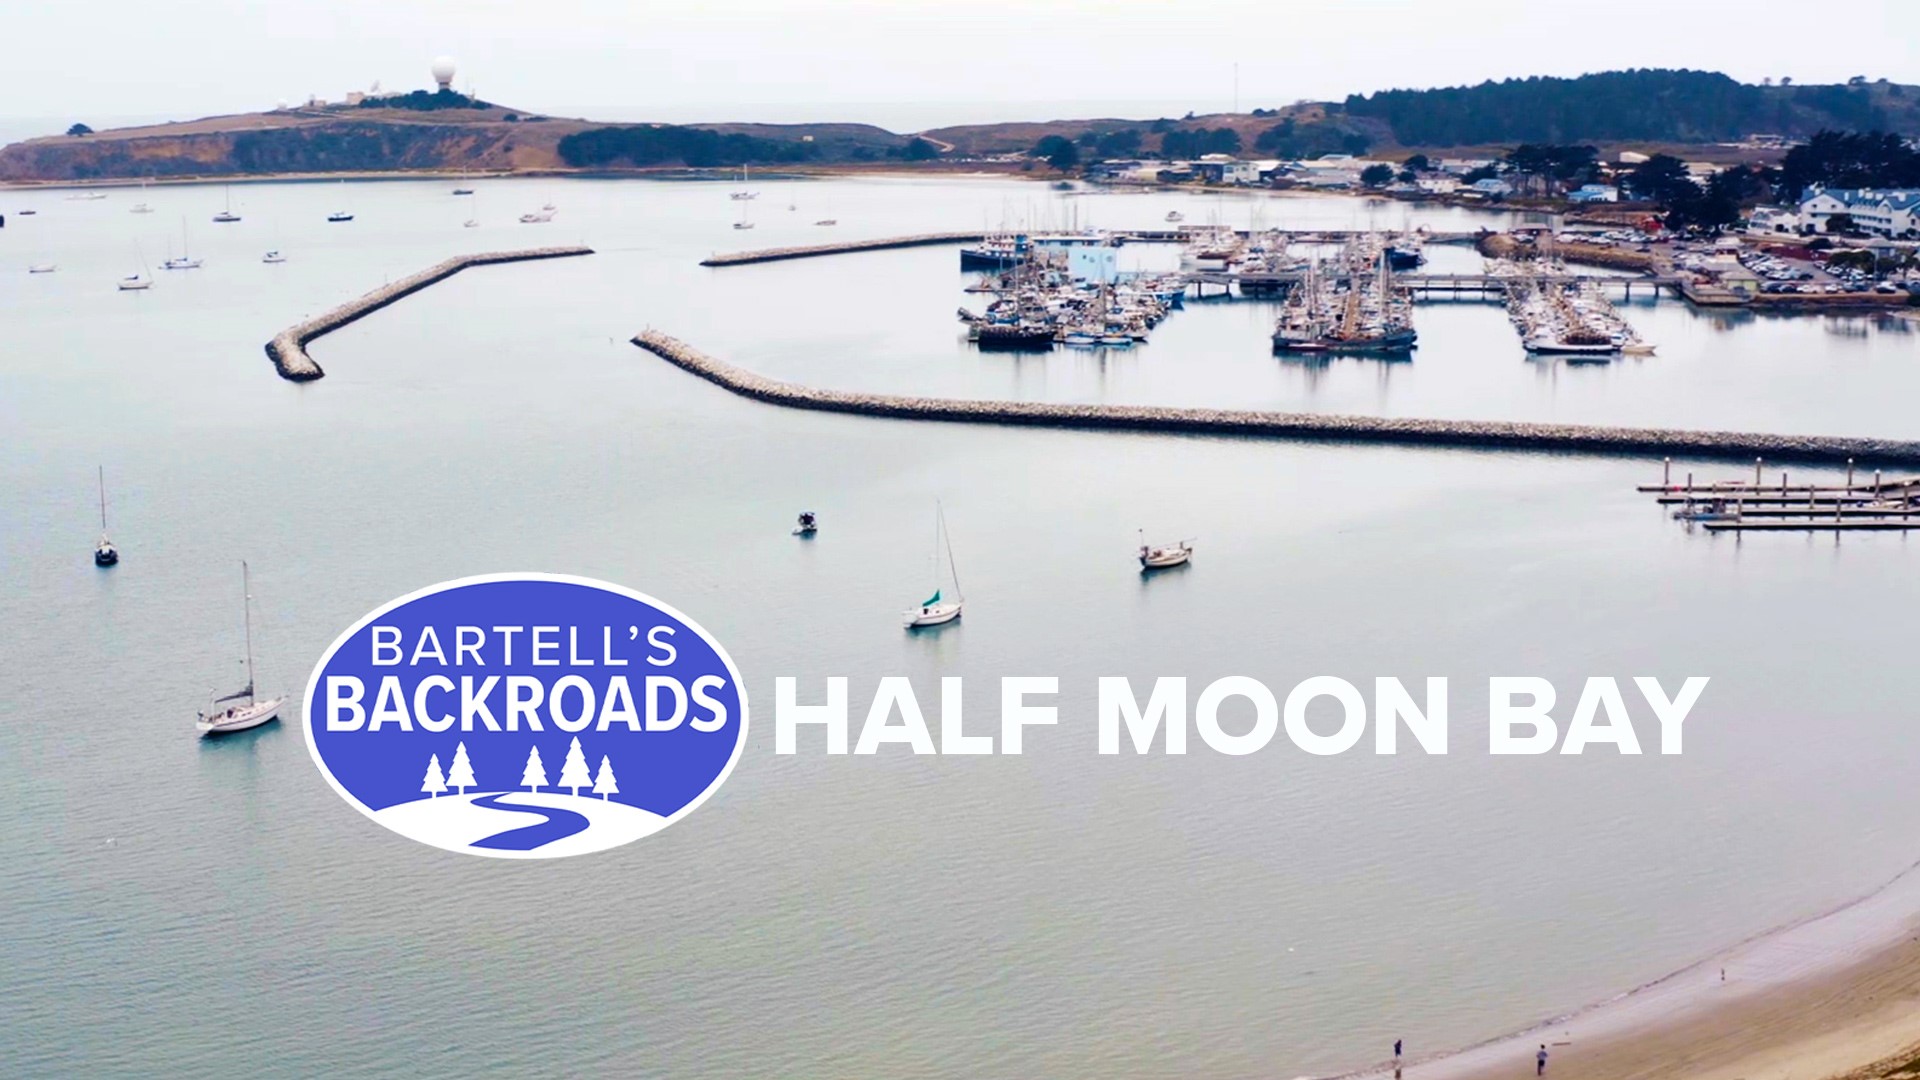 Pumpkins, surfing, and odd shaped houses, are just some of the charms of Half Moon Bay. You may even spot a whale if you're lucky! Recorded pre-coronavirus.